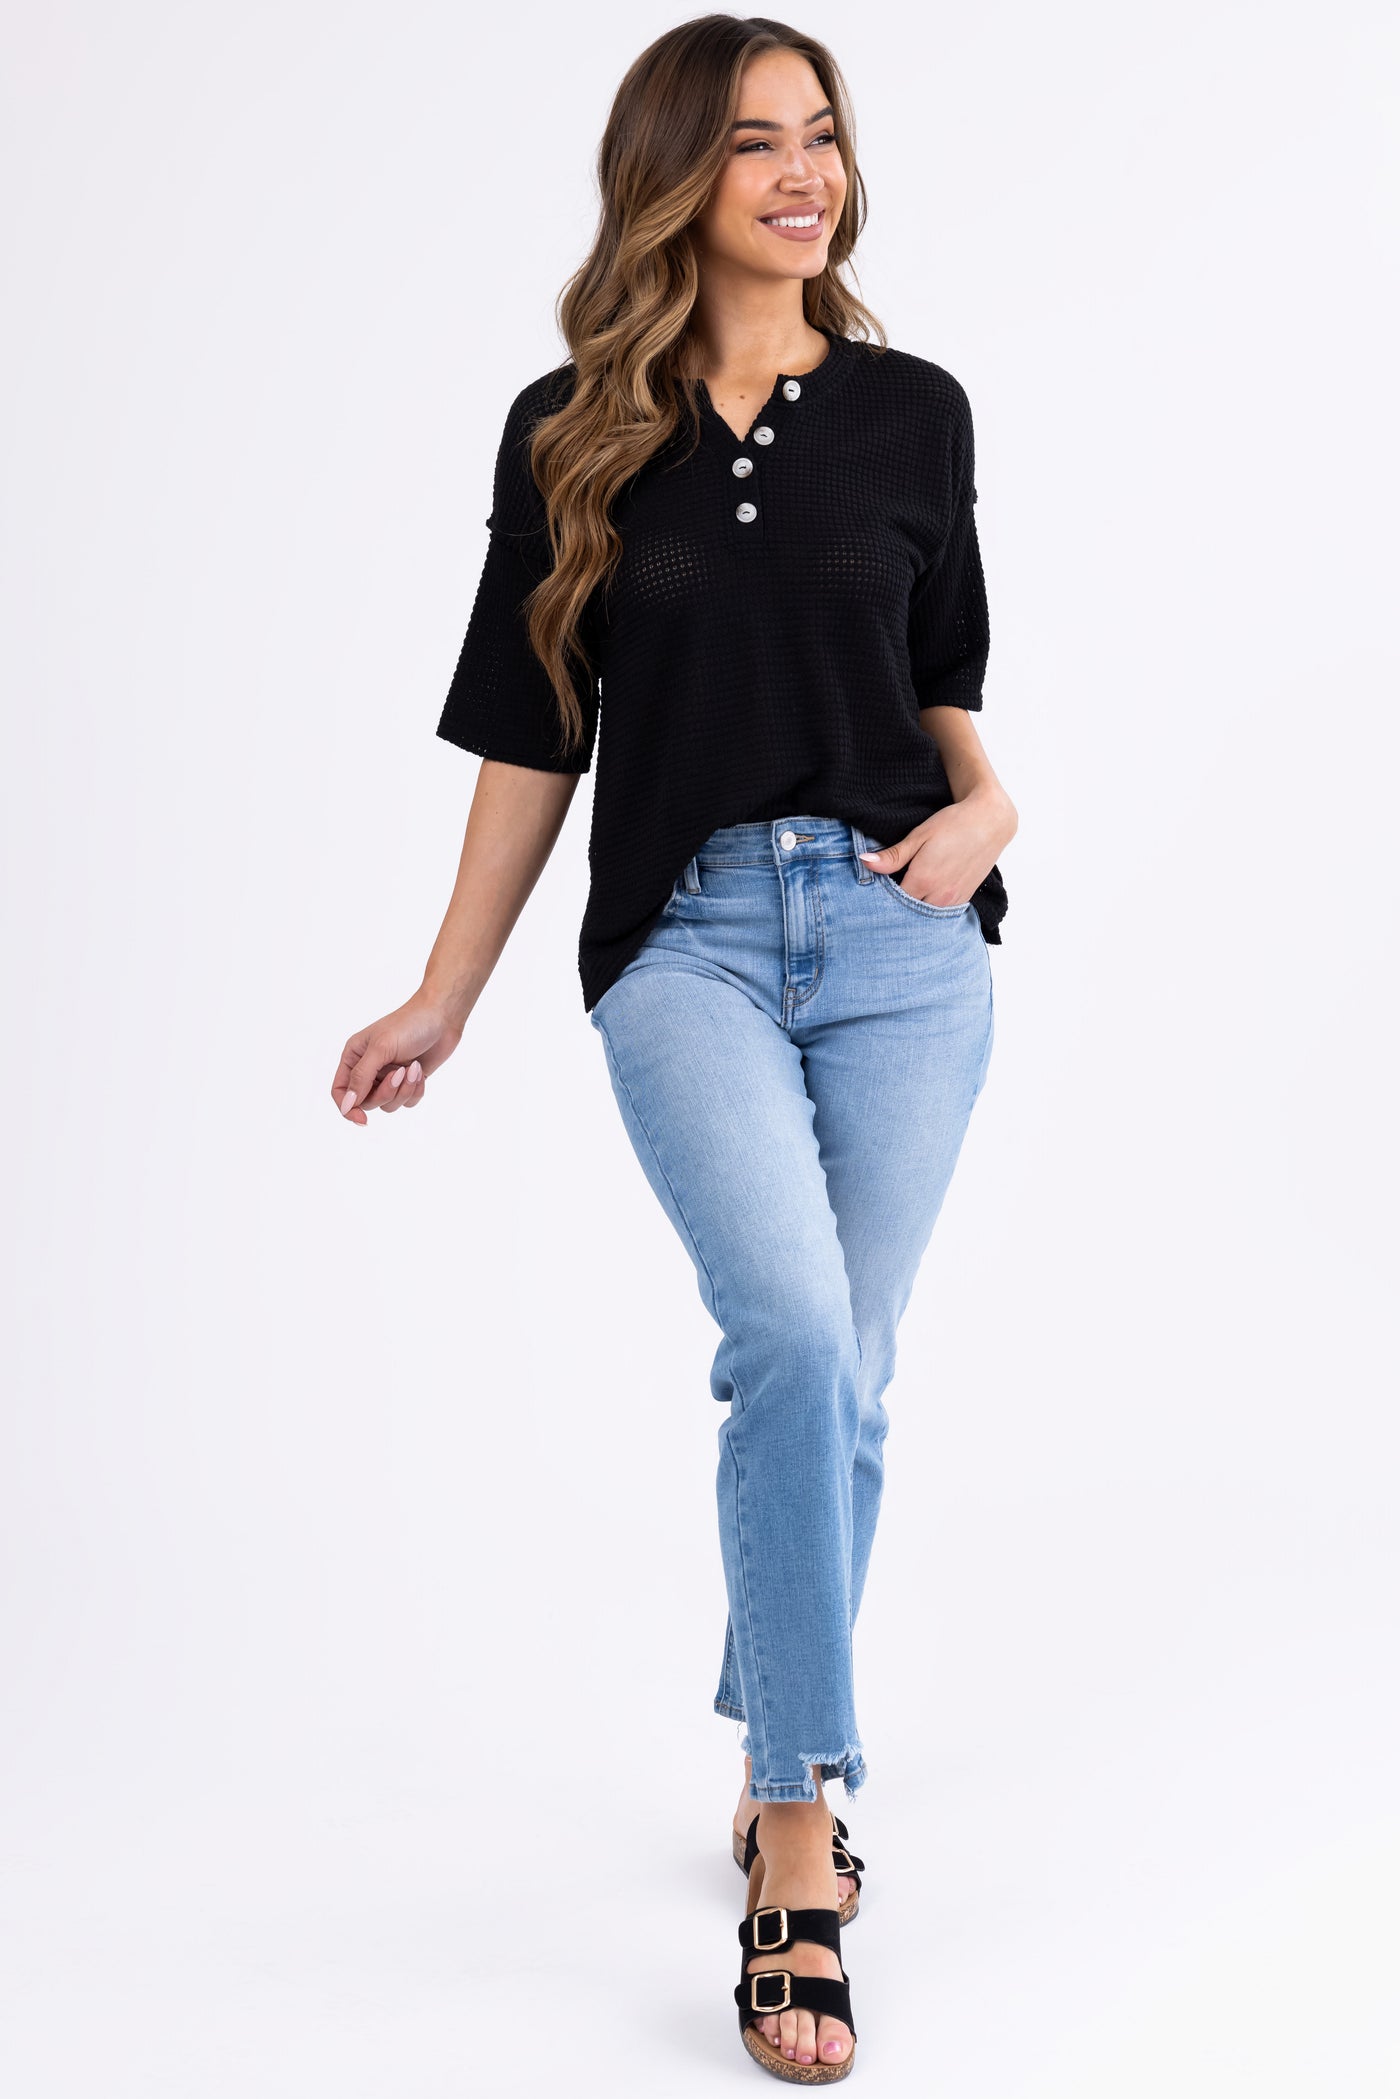 Black Waffle Knit Half Sleeve Button Top